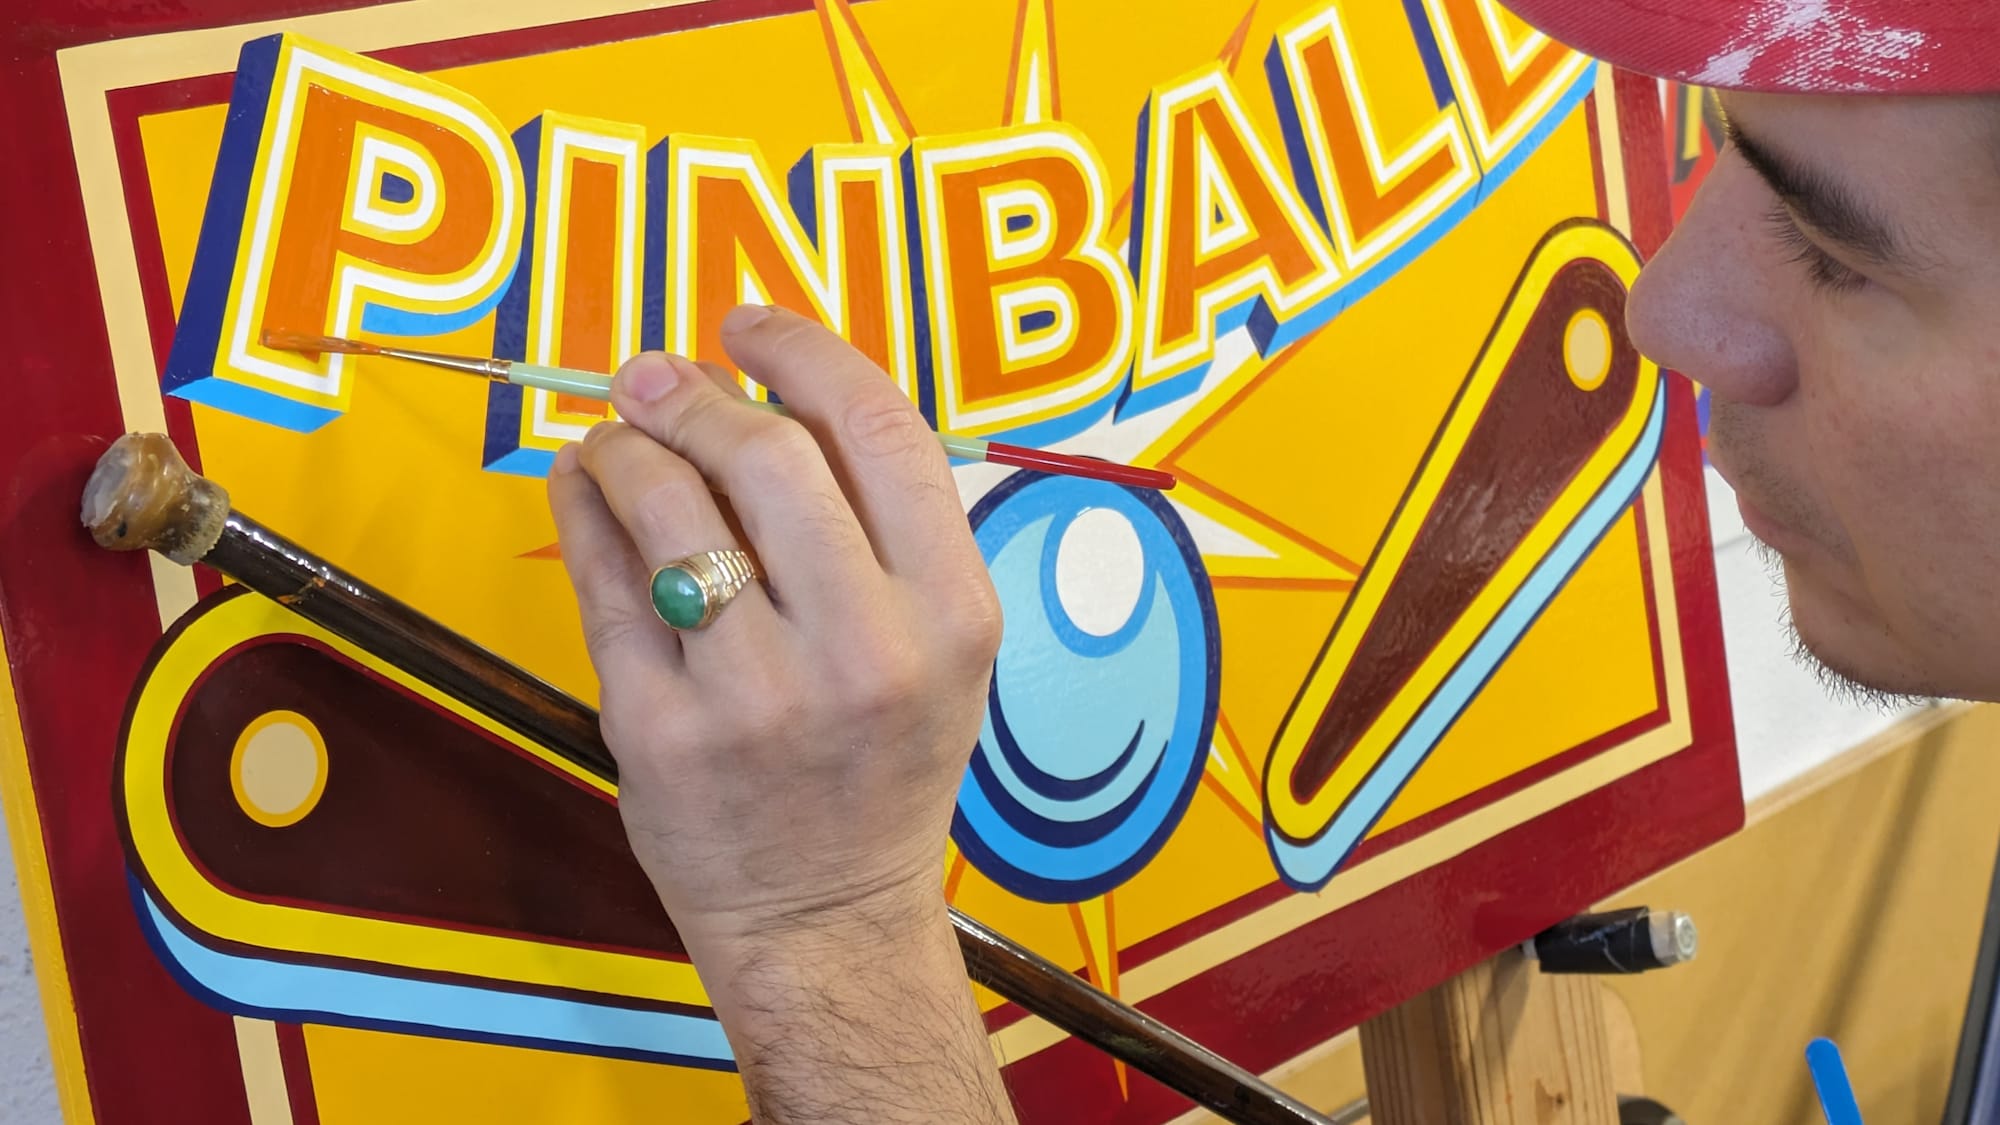 Man painting a brightly coloured sign that says 'Pinball' and has an illustration of the ball and flippers.